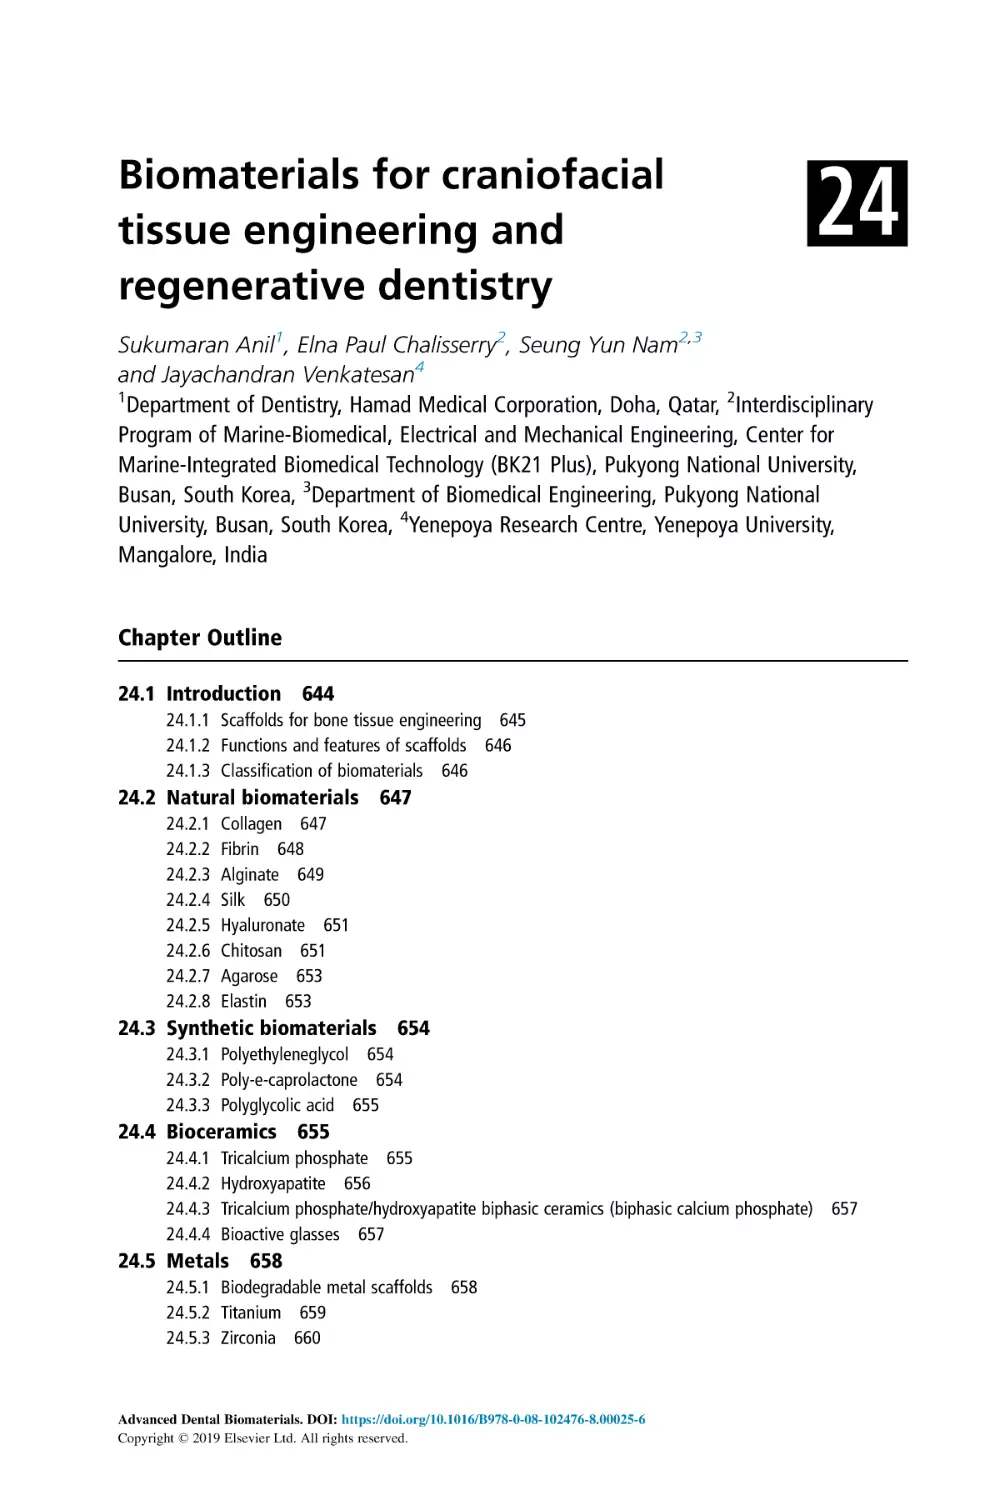 24 Biomaterials for craniofacial tissue engineering and regenerative dentistry
Chapter Outline